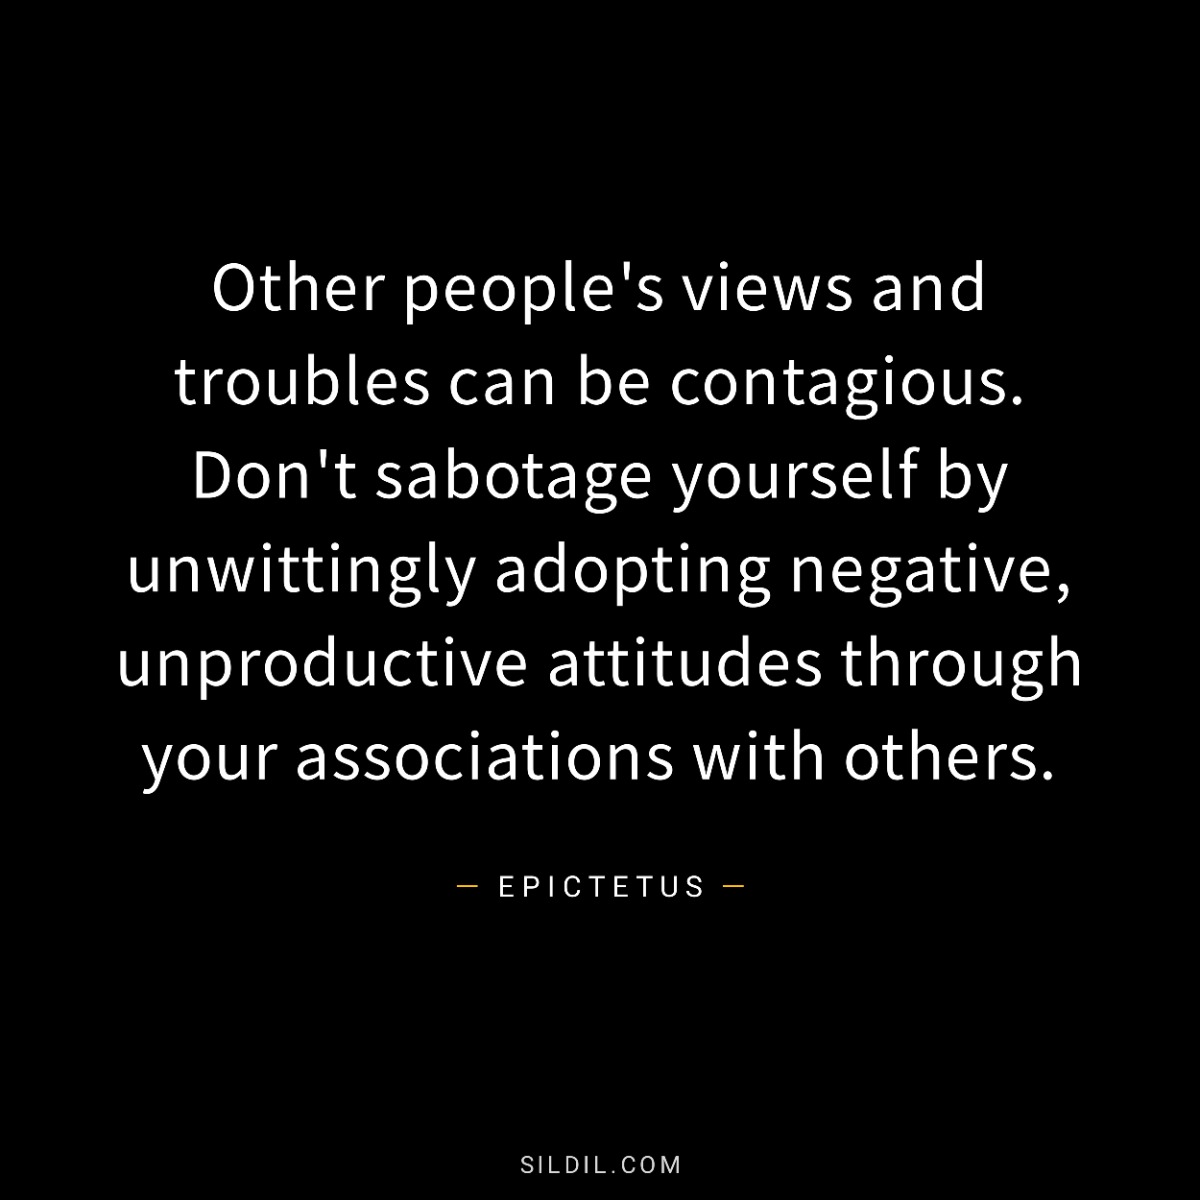 Other people's views and troubles can be contagious. Don't sabotage yourself by unwittingly adopting negative, unproductive attitudes through your associations with others.